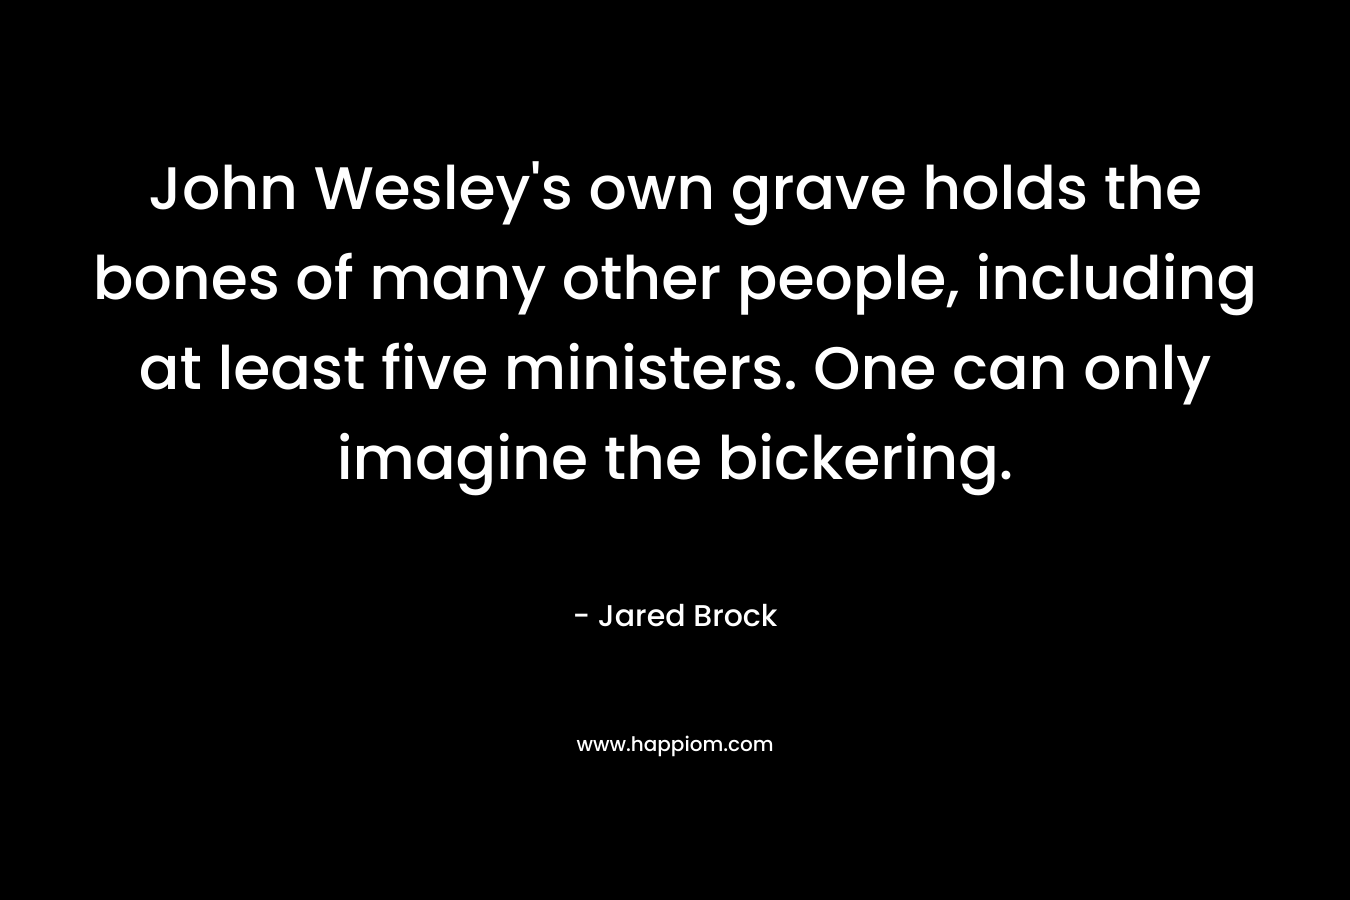 John Wesley’s own grave holds the bones of many other people, including at least five ministers. One can only imagine the bickering. – Jared Brock